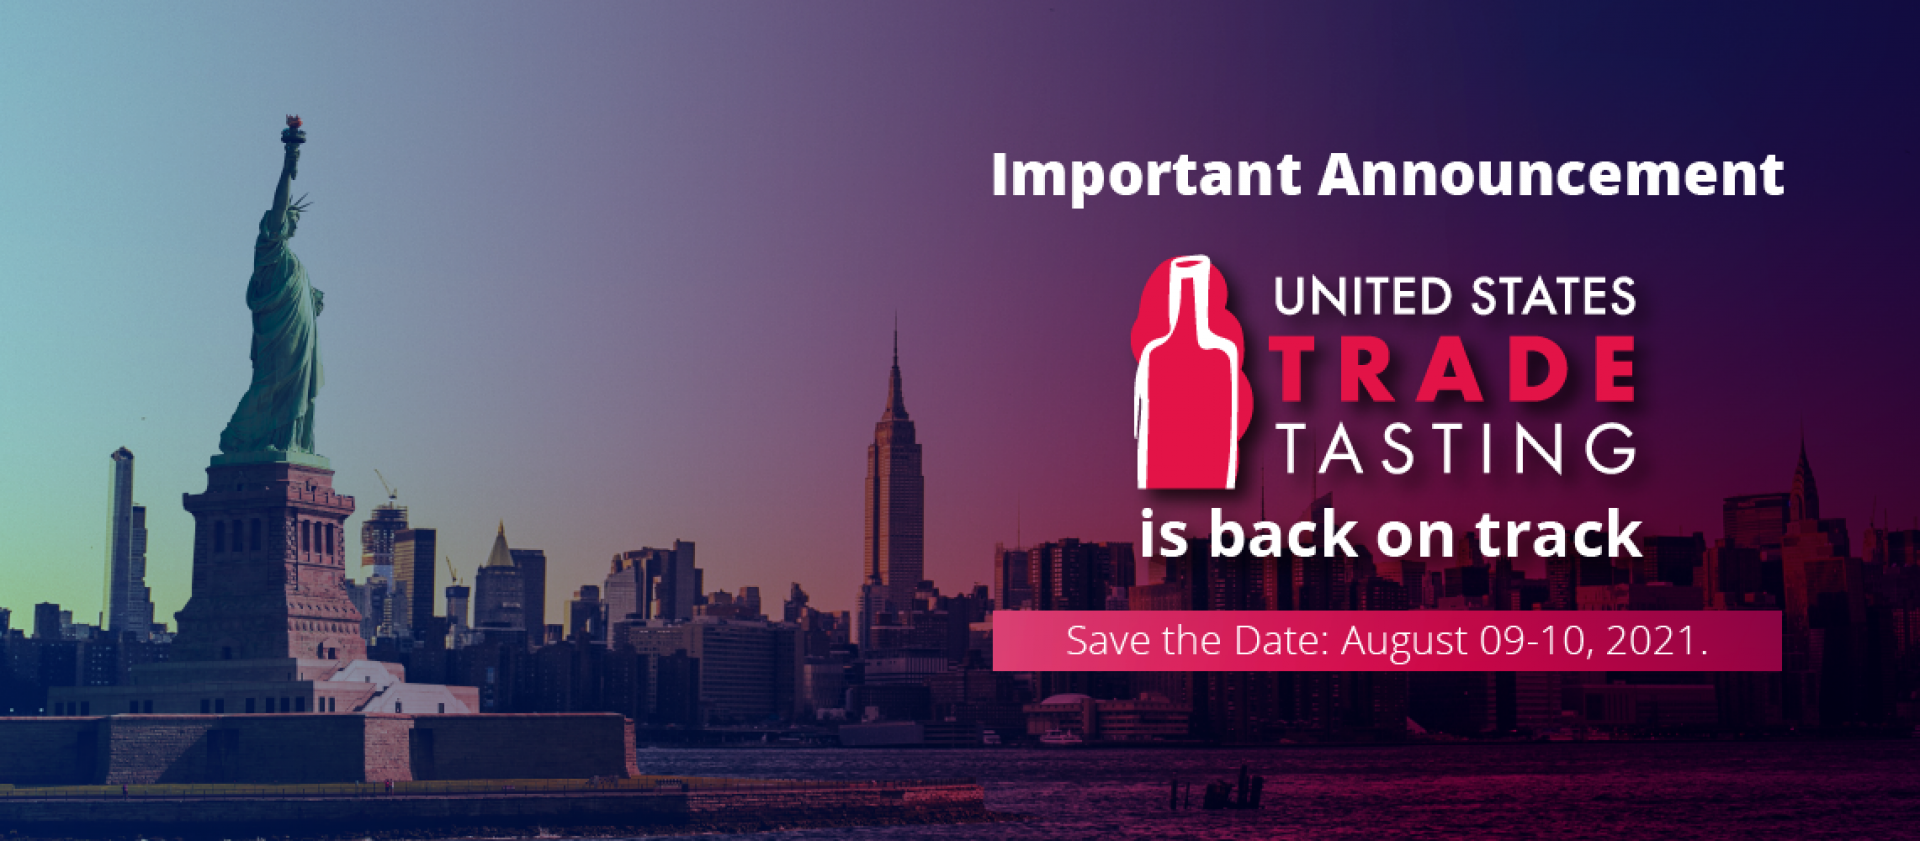 Photo for: USA Trade Tasting New Dates Announced To Be August 9-10, 2021